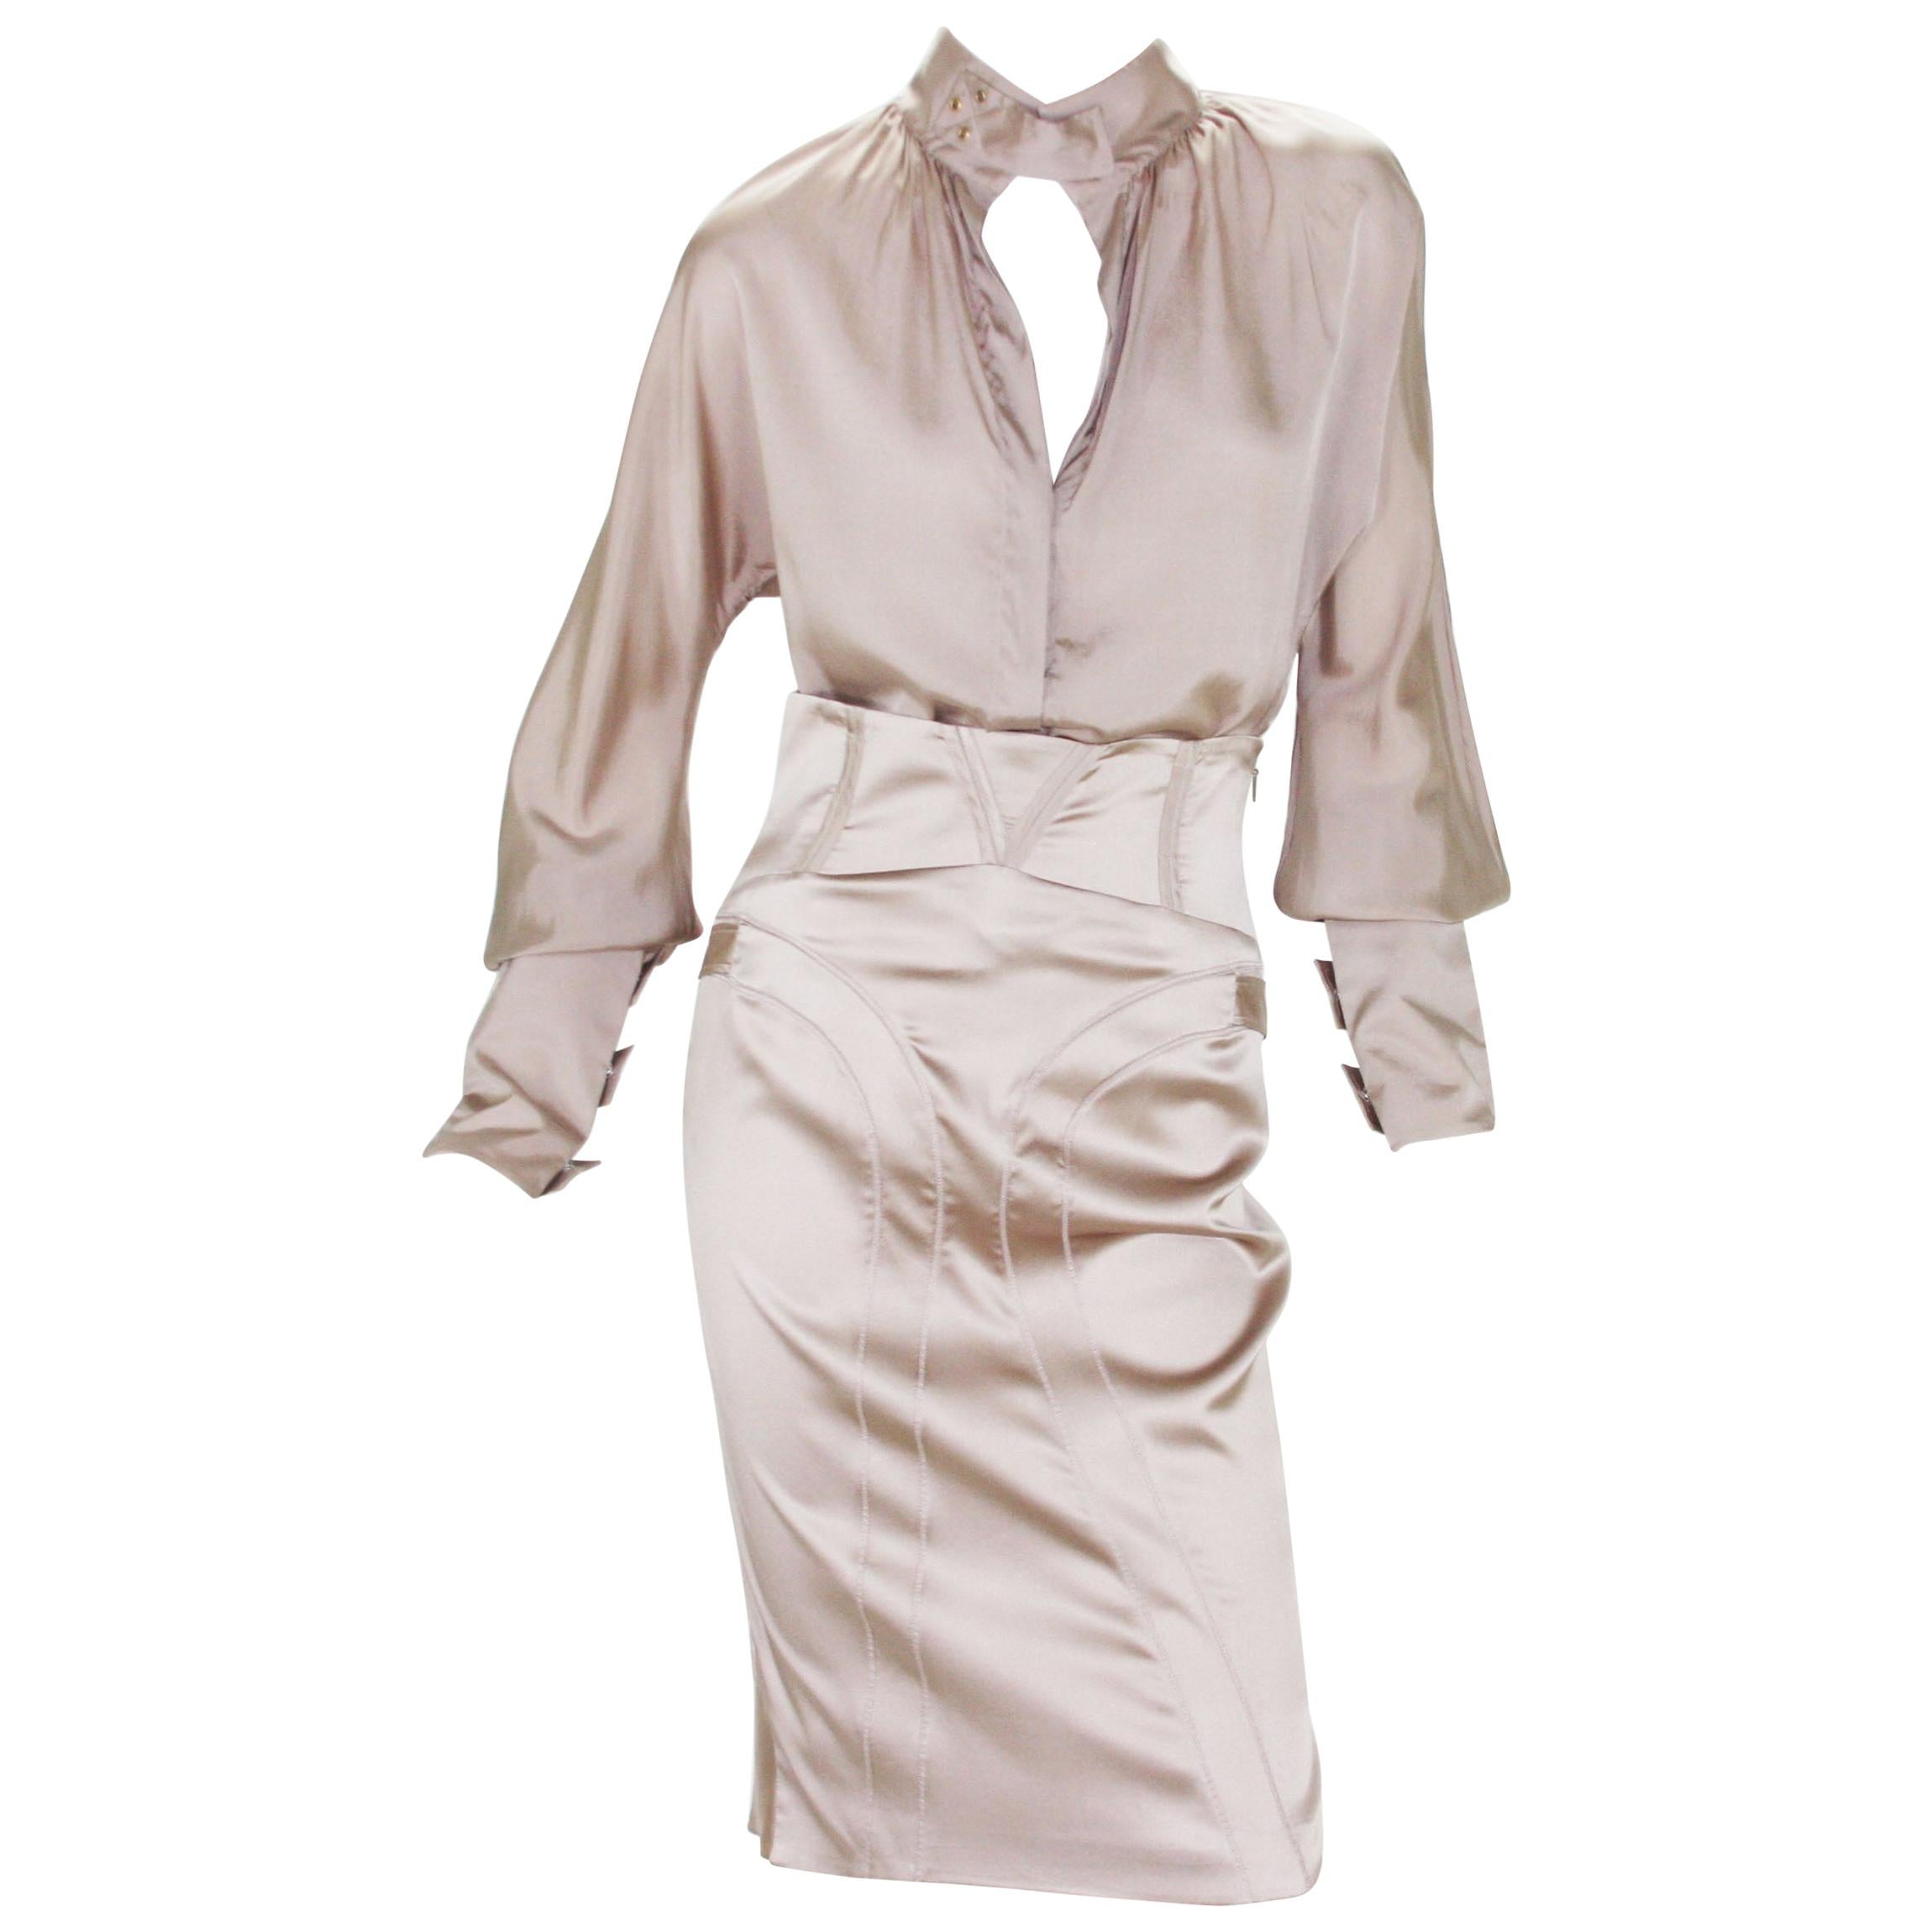 Tom Ford for Gucci F/W 2003 Collection Nude Silk Grommet Skirt Suit 40/42  For Sale